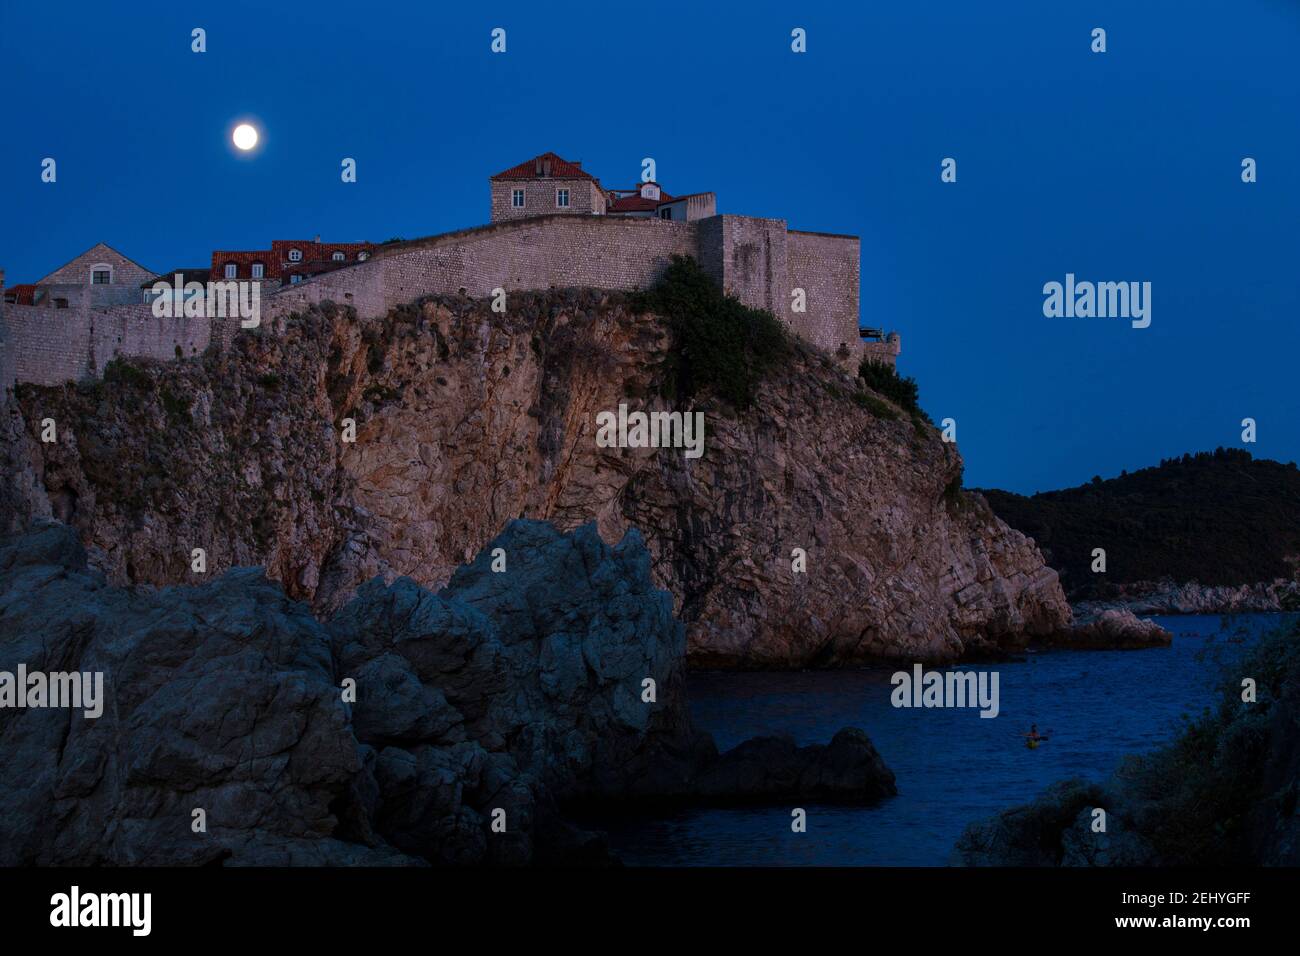 Night Photograph of City of Dubrovniks Walls on a Cliff with a Full Moon and Sea in the background Stock Photo